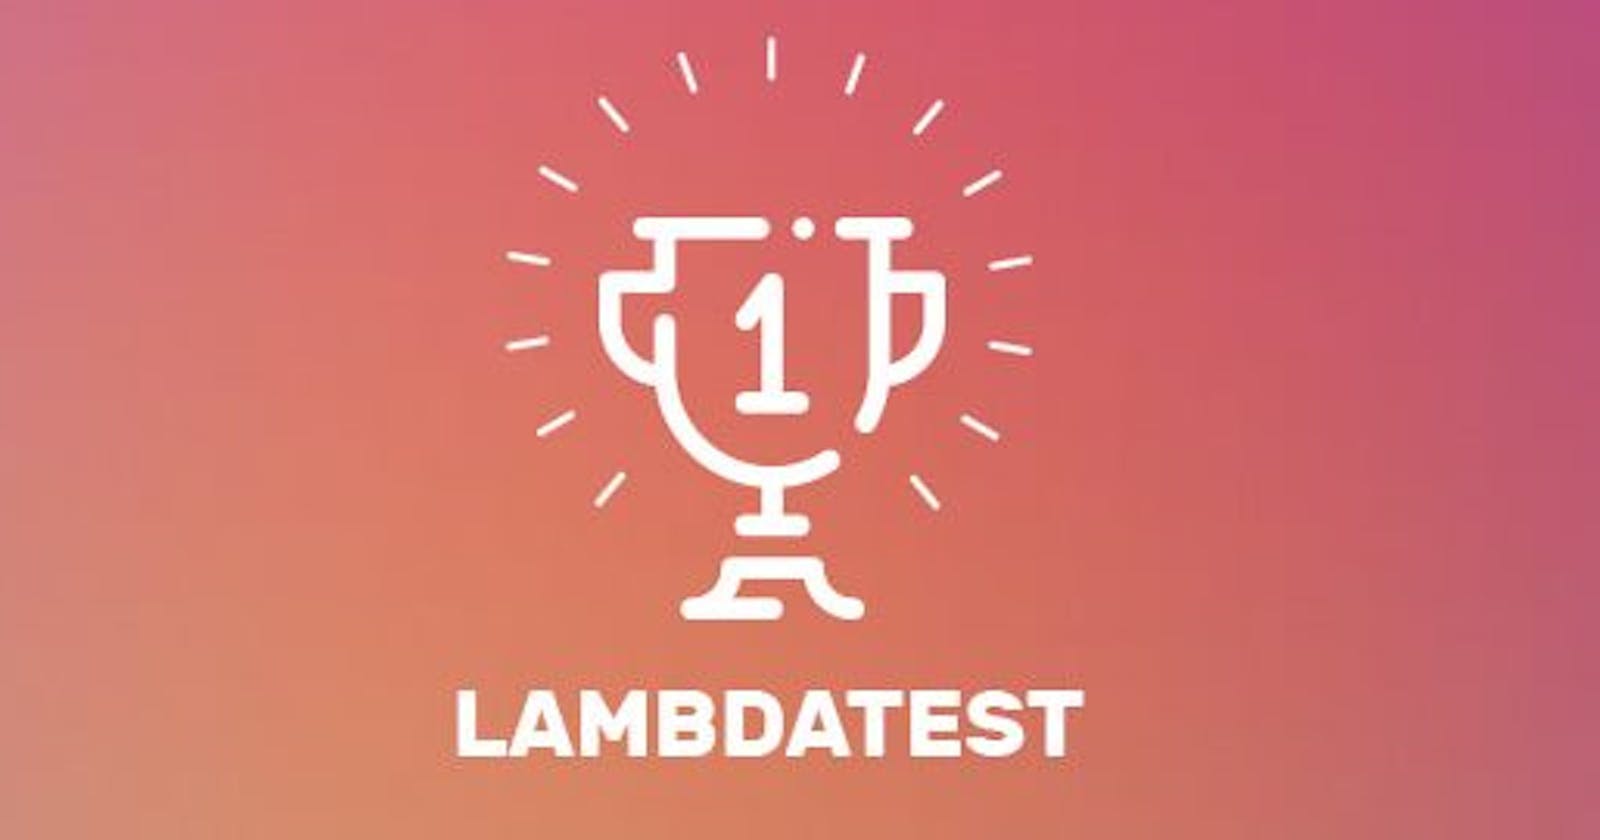 LambdaTest Receives Top Distinctions for Test Management Software from Leading Business Software Directory